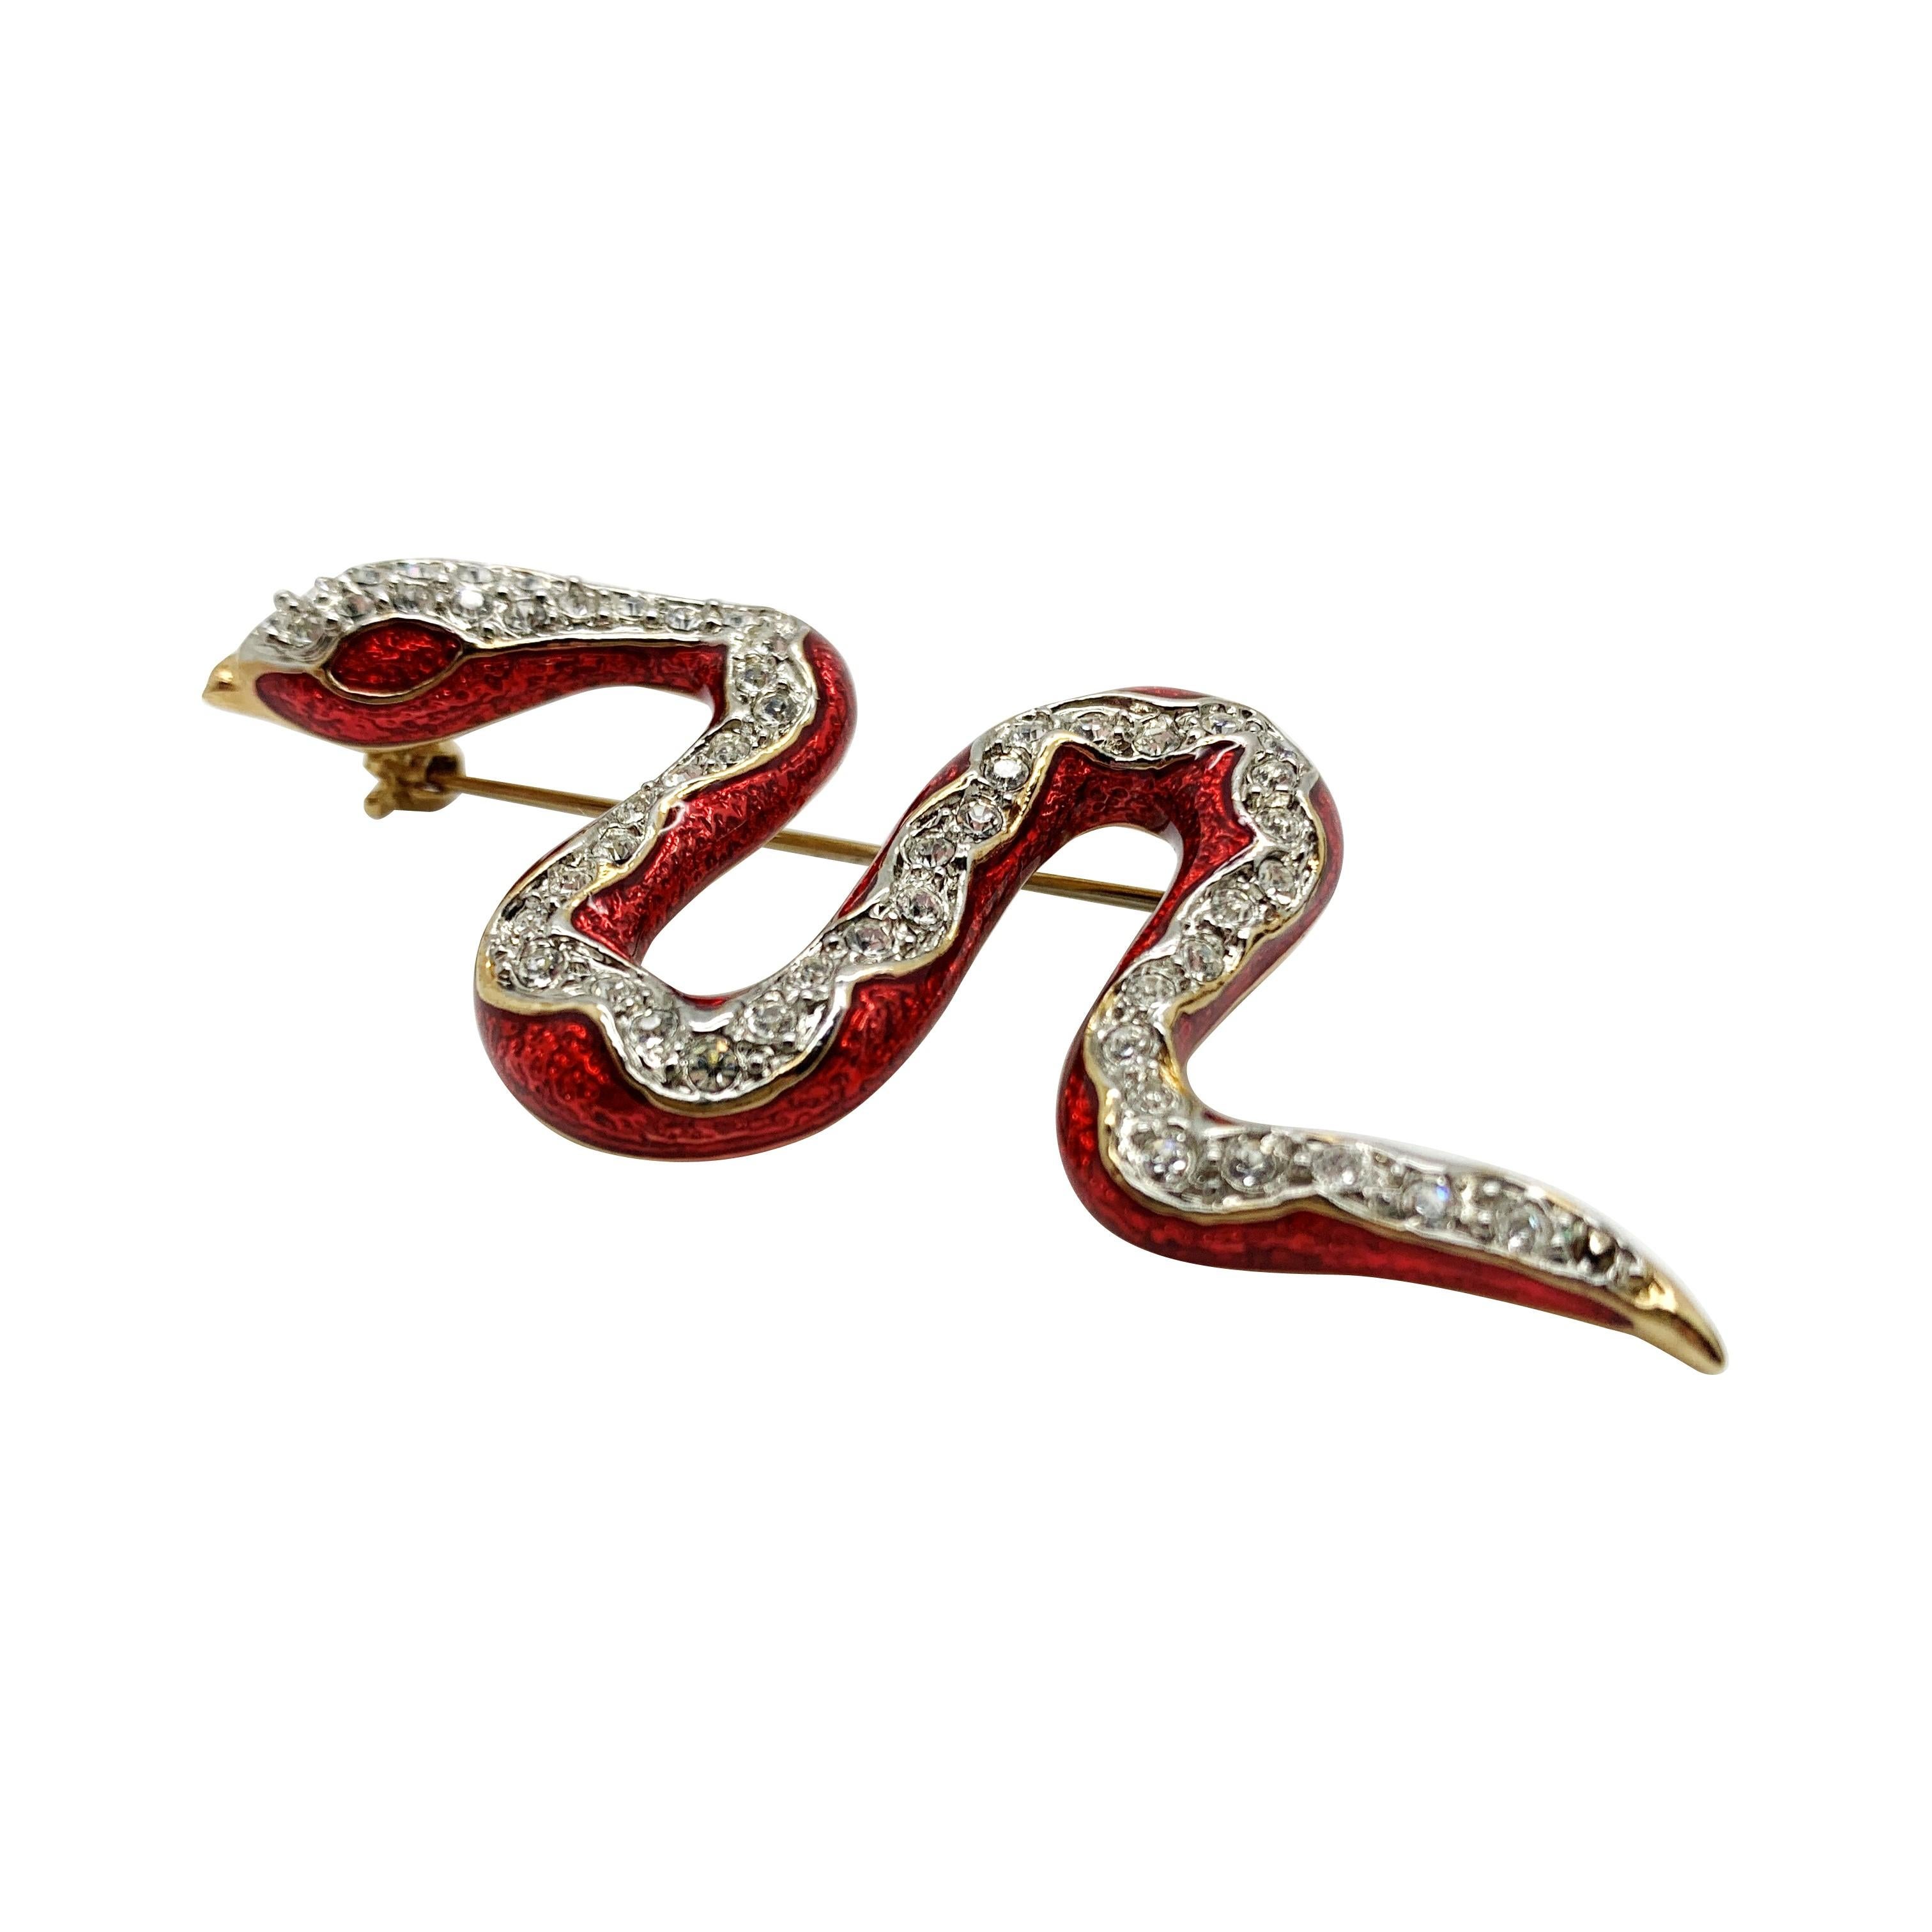 A Vintage Enamel Snake Brooch. Featuring lustrous red enamel with a swathe of crystals.  
Vintage Condition: Very good without damage or noteworthy wear. 
Materials: Gold Plated metal, enamel, glass crystal
Signed: Unsigned
Fastening: Rollover